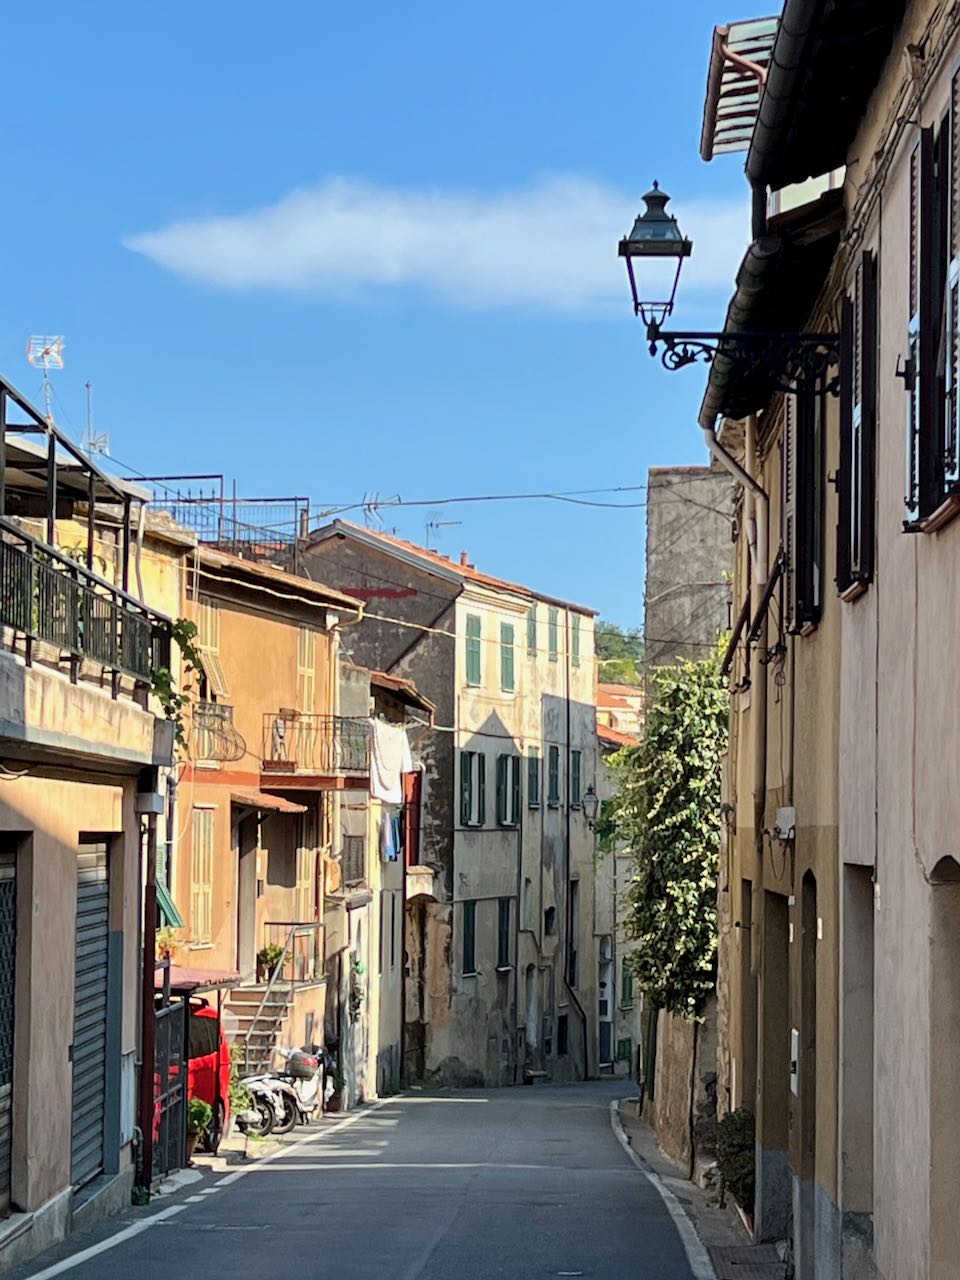 View near the top of the Poggio with an Italian lamppost and historic buildings